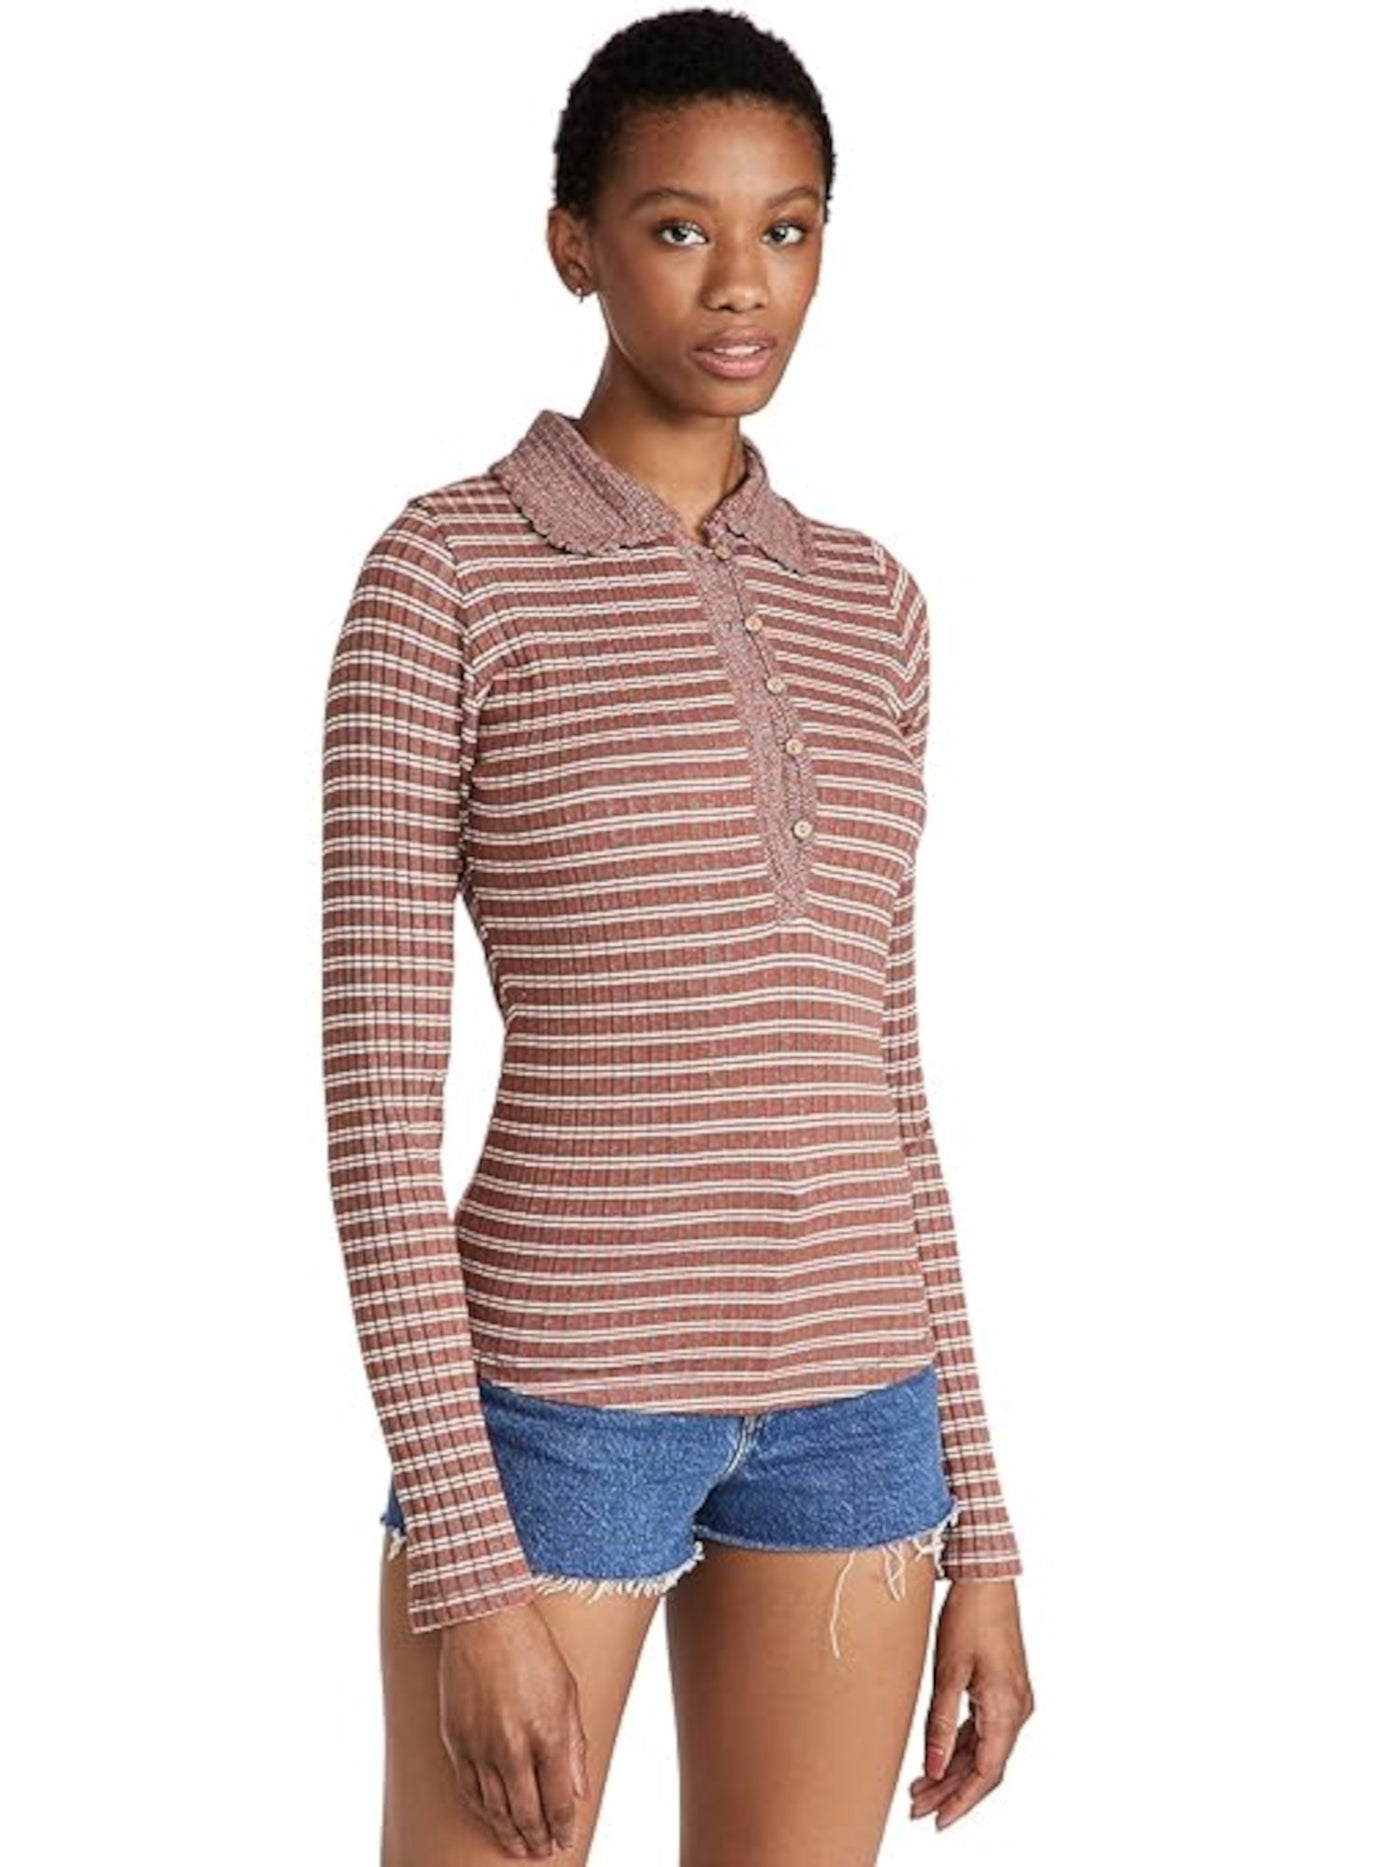 FREE PEOPLE Womens Brown Ribbed Crochet Trim Button Half Placket Striped Long Sleeve Collared Top Juniors XS